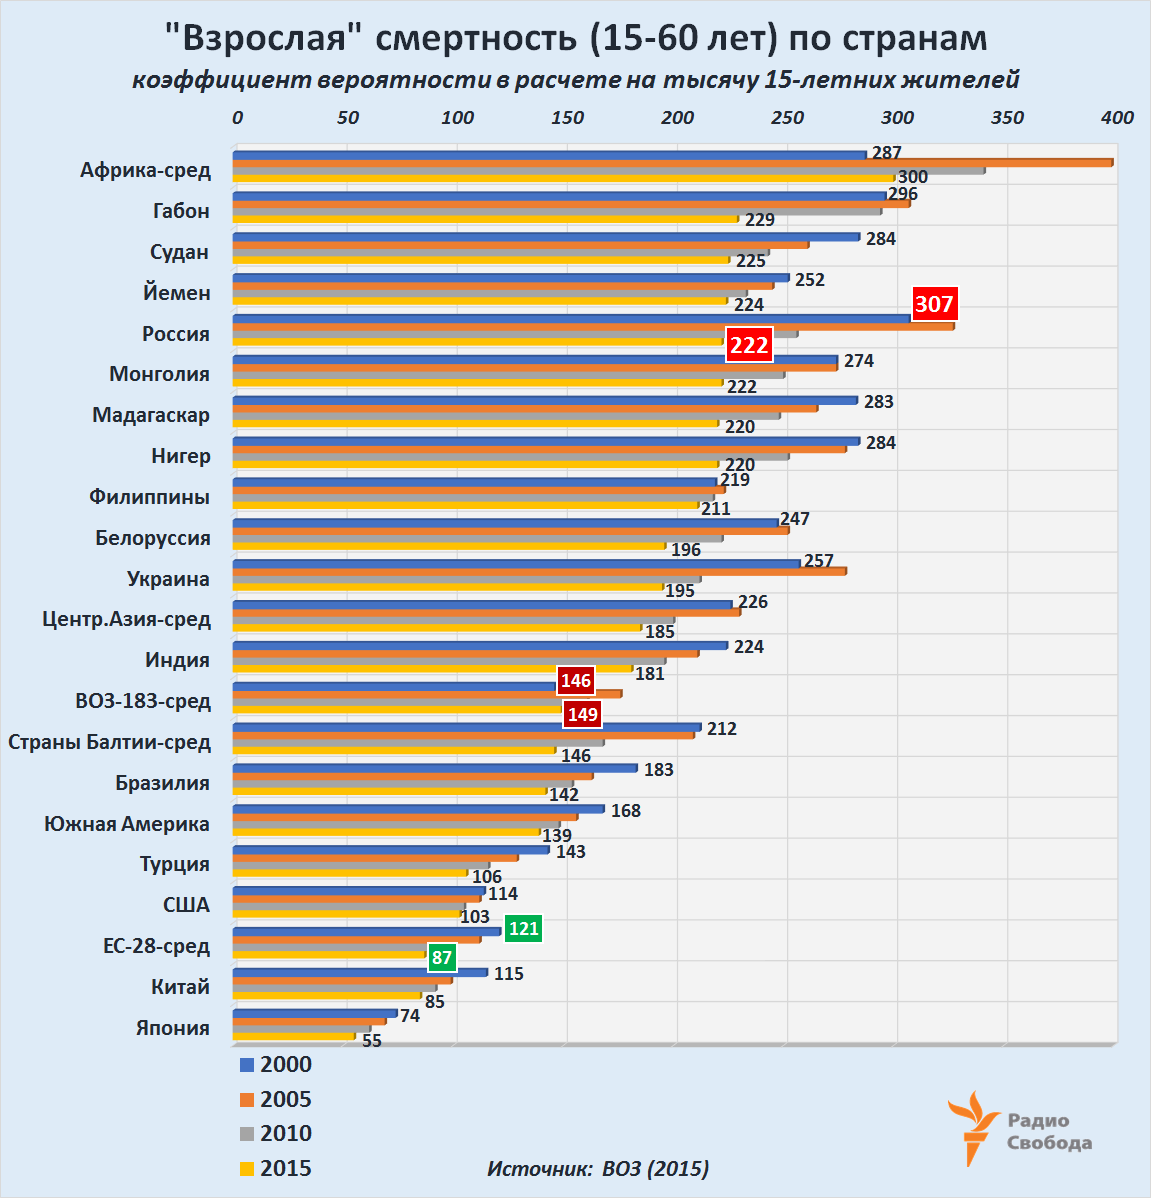 Russia-Factograph-Adult Mortality Rate-WHO-World-2000-2015